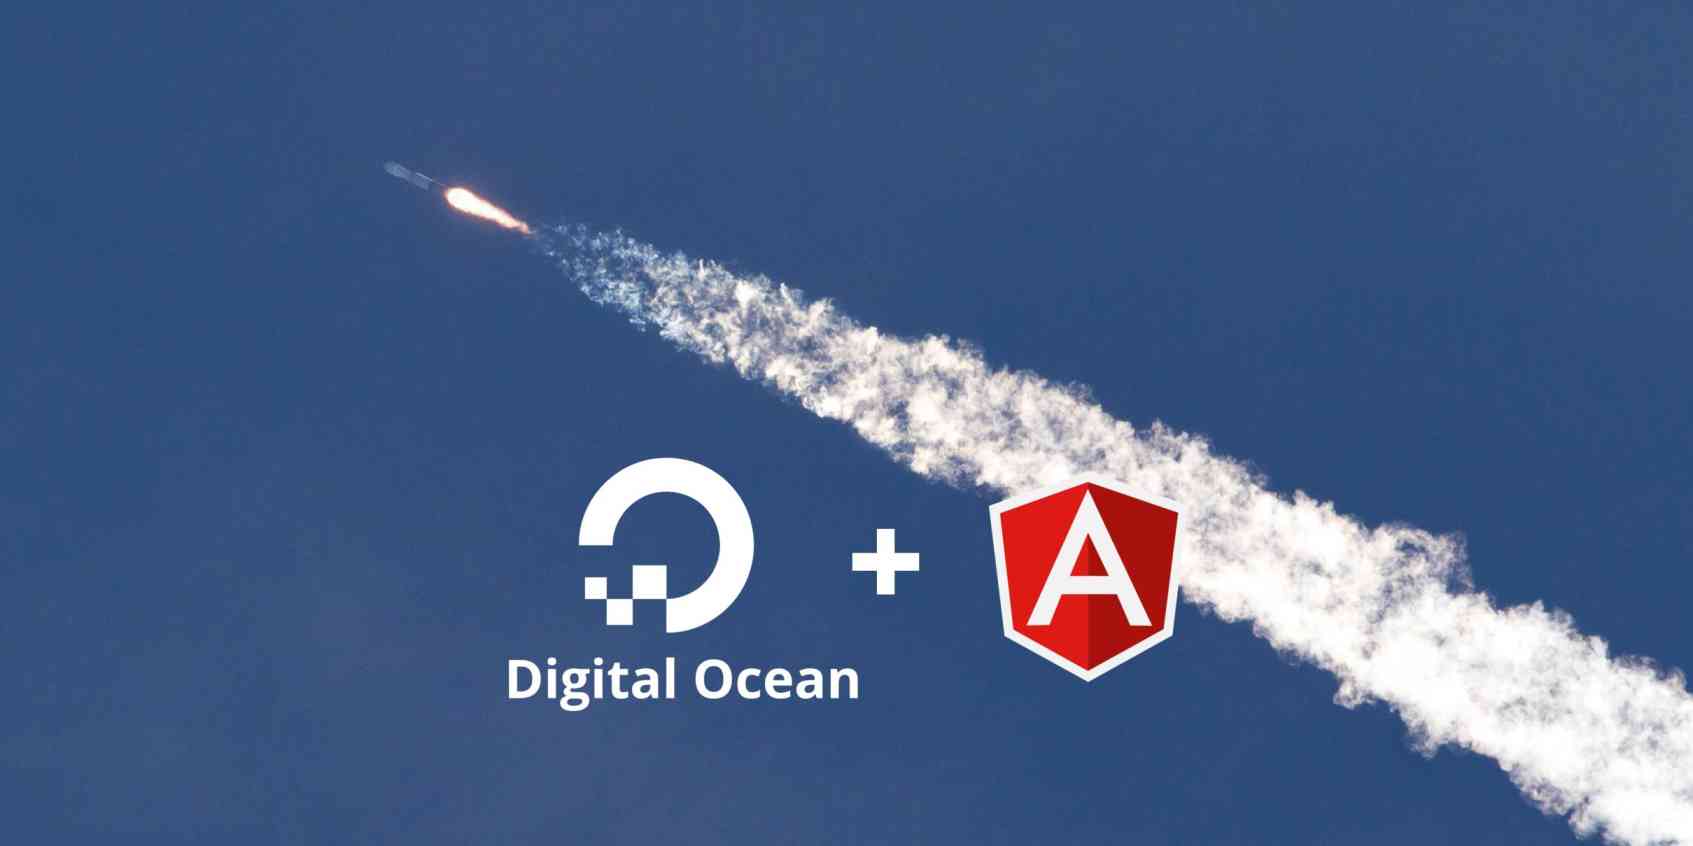 How to Deploy an Angular Application to Digital Ocean